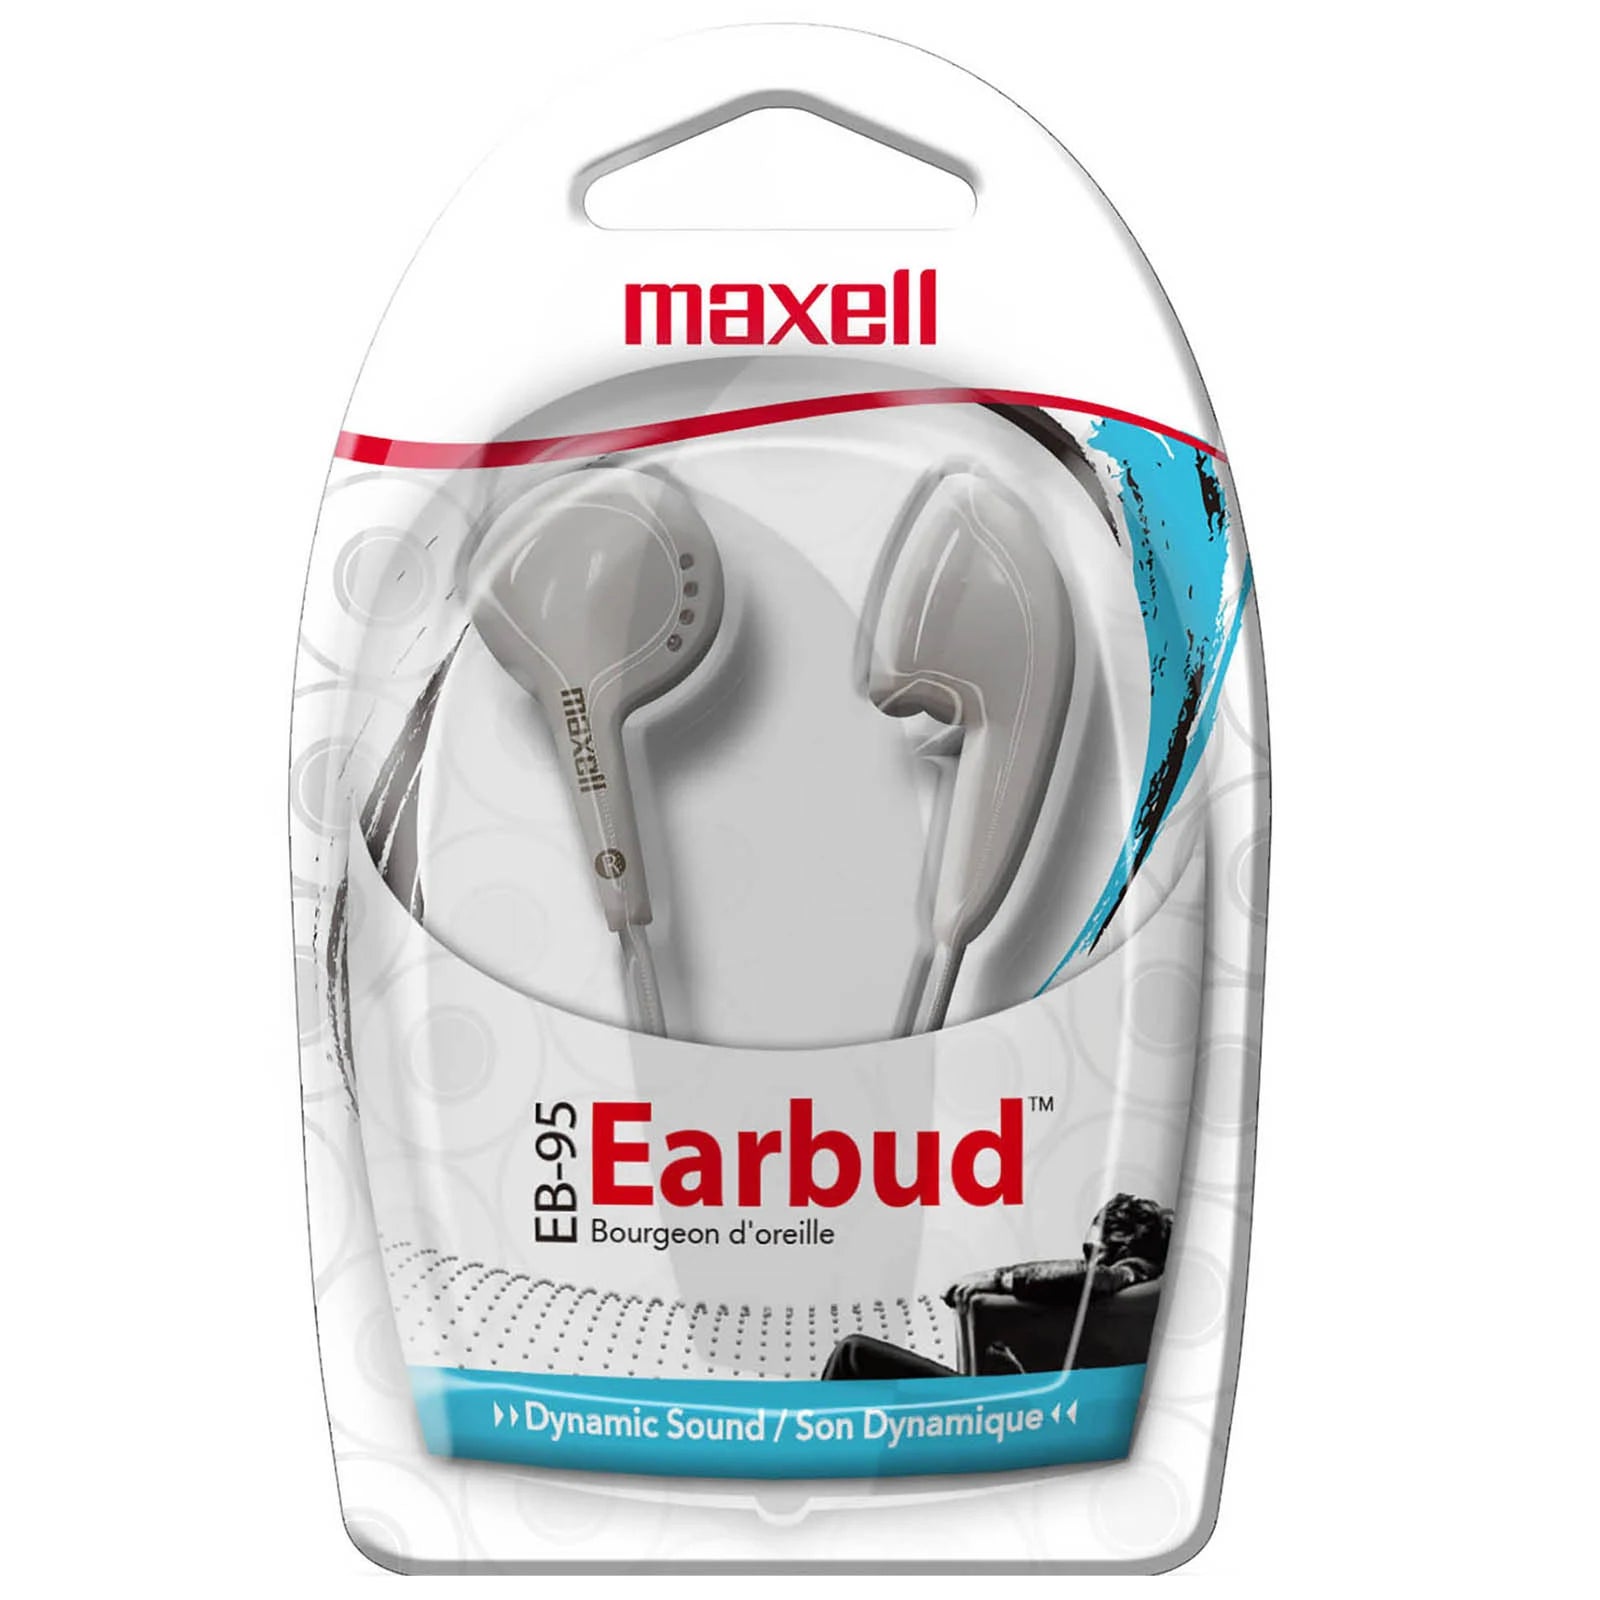 Maxell Wired Earbuds, White (EB 95)